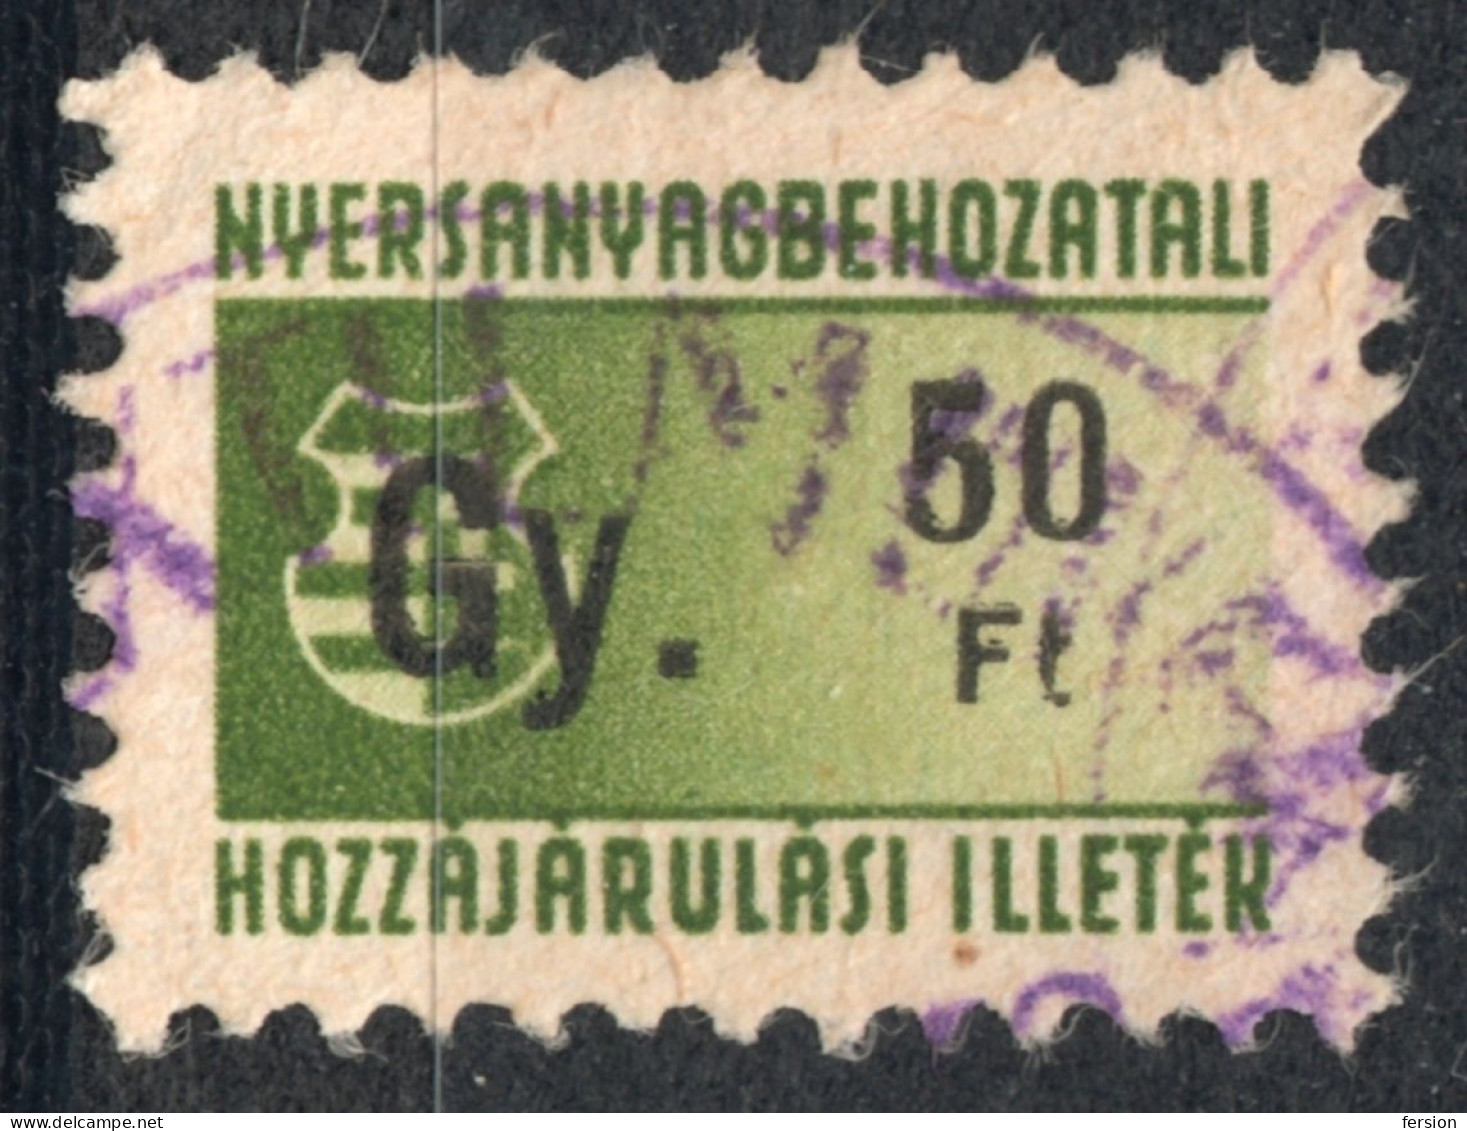 1948 Hungary - Wool Import Tax -  FISCAL BILL - Revenue Stamp - 50 Ft - Used - RR! - KOSSUTH Coat Of Arms - Fiscali